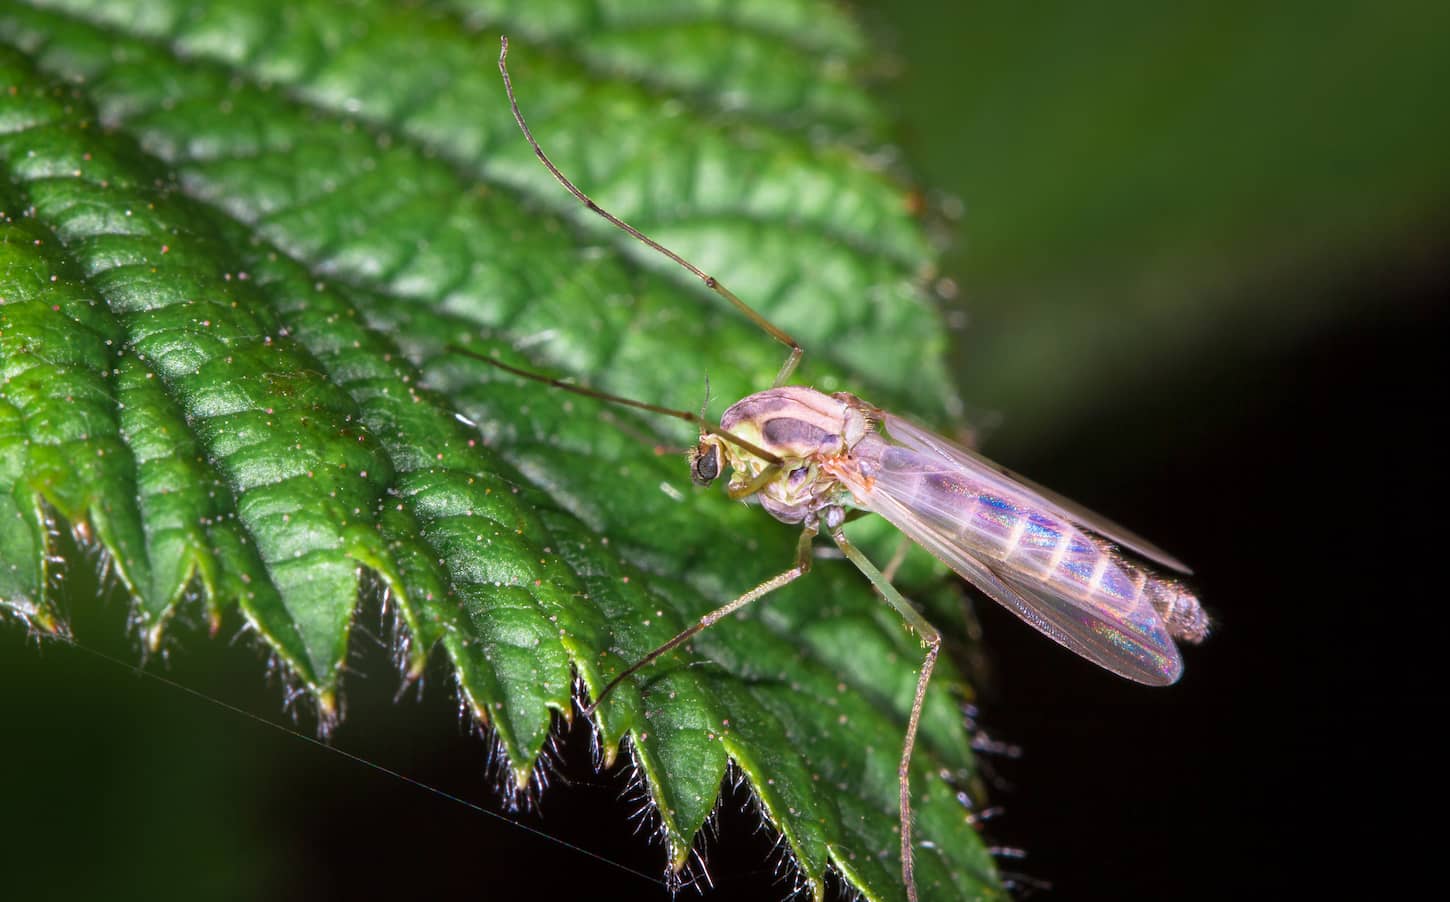 A close-up image of a large mosquito with iridescent wings photographed on a leaf at night at the Wood Lane Nature Reserve in Shropshire, England.